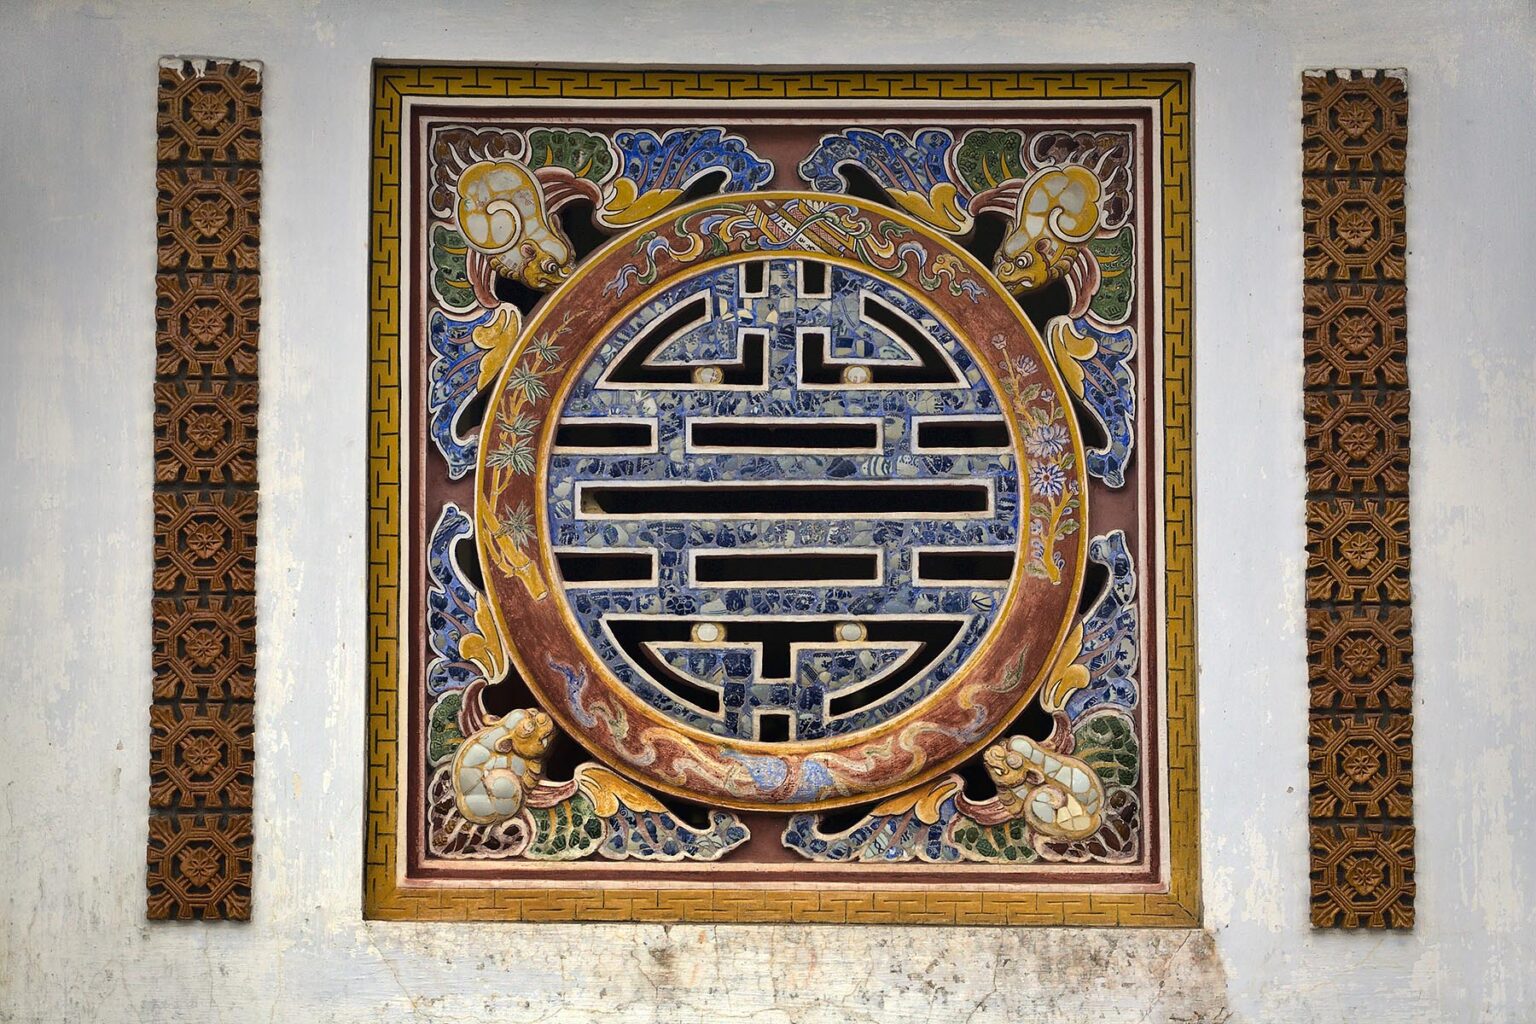 Detail of a tile sculpture on the wall of the HALL OF THE MANDARINS,  IMPERIAL CITADEL - HUE, VIETNAM